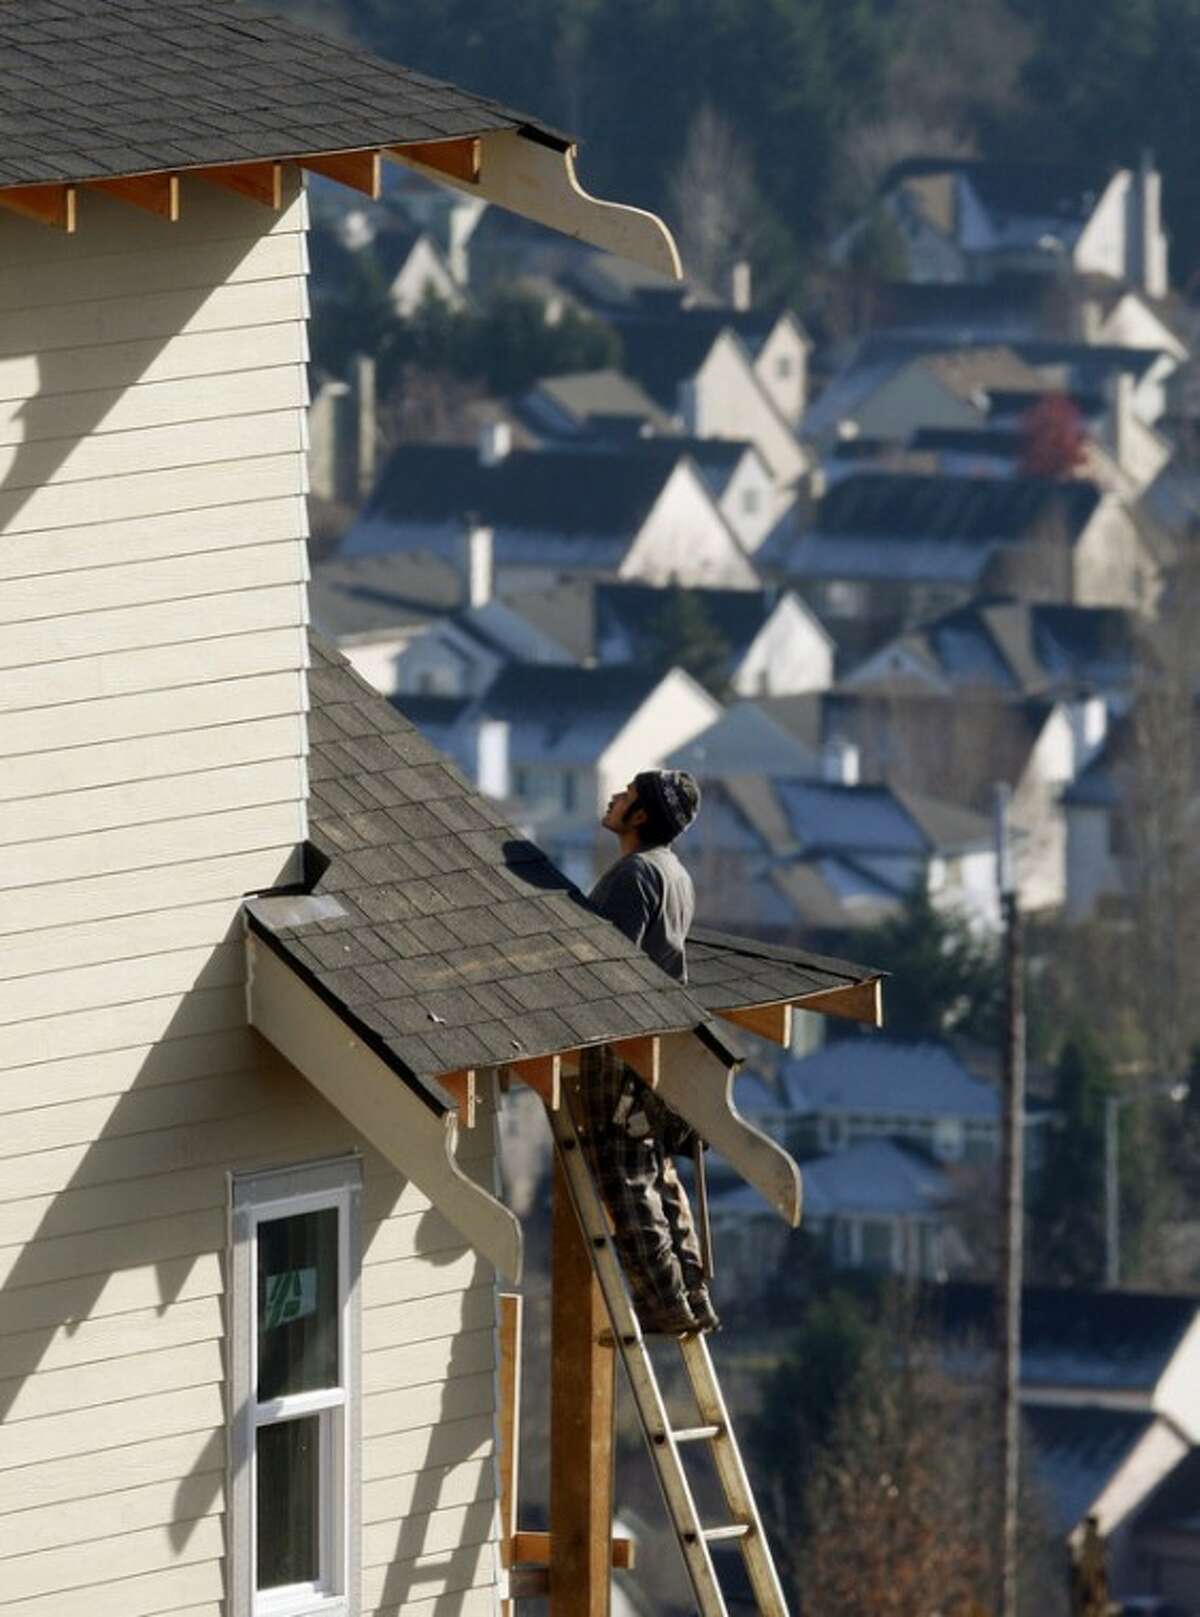 In this Dec. 20, 2011 photo, a carpenter works on a roof of a home in Happy Valley, Ore. U.S. home prices fell in most major cities for the second straight month, further evidence that the housing recovery will be bumpy. (AP Photo/Rick Bowmer)